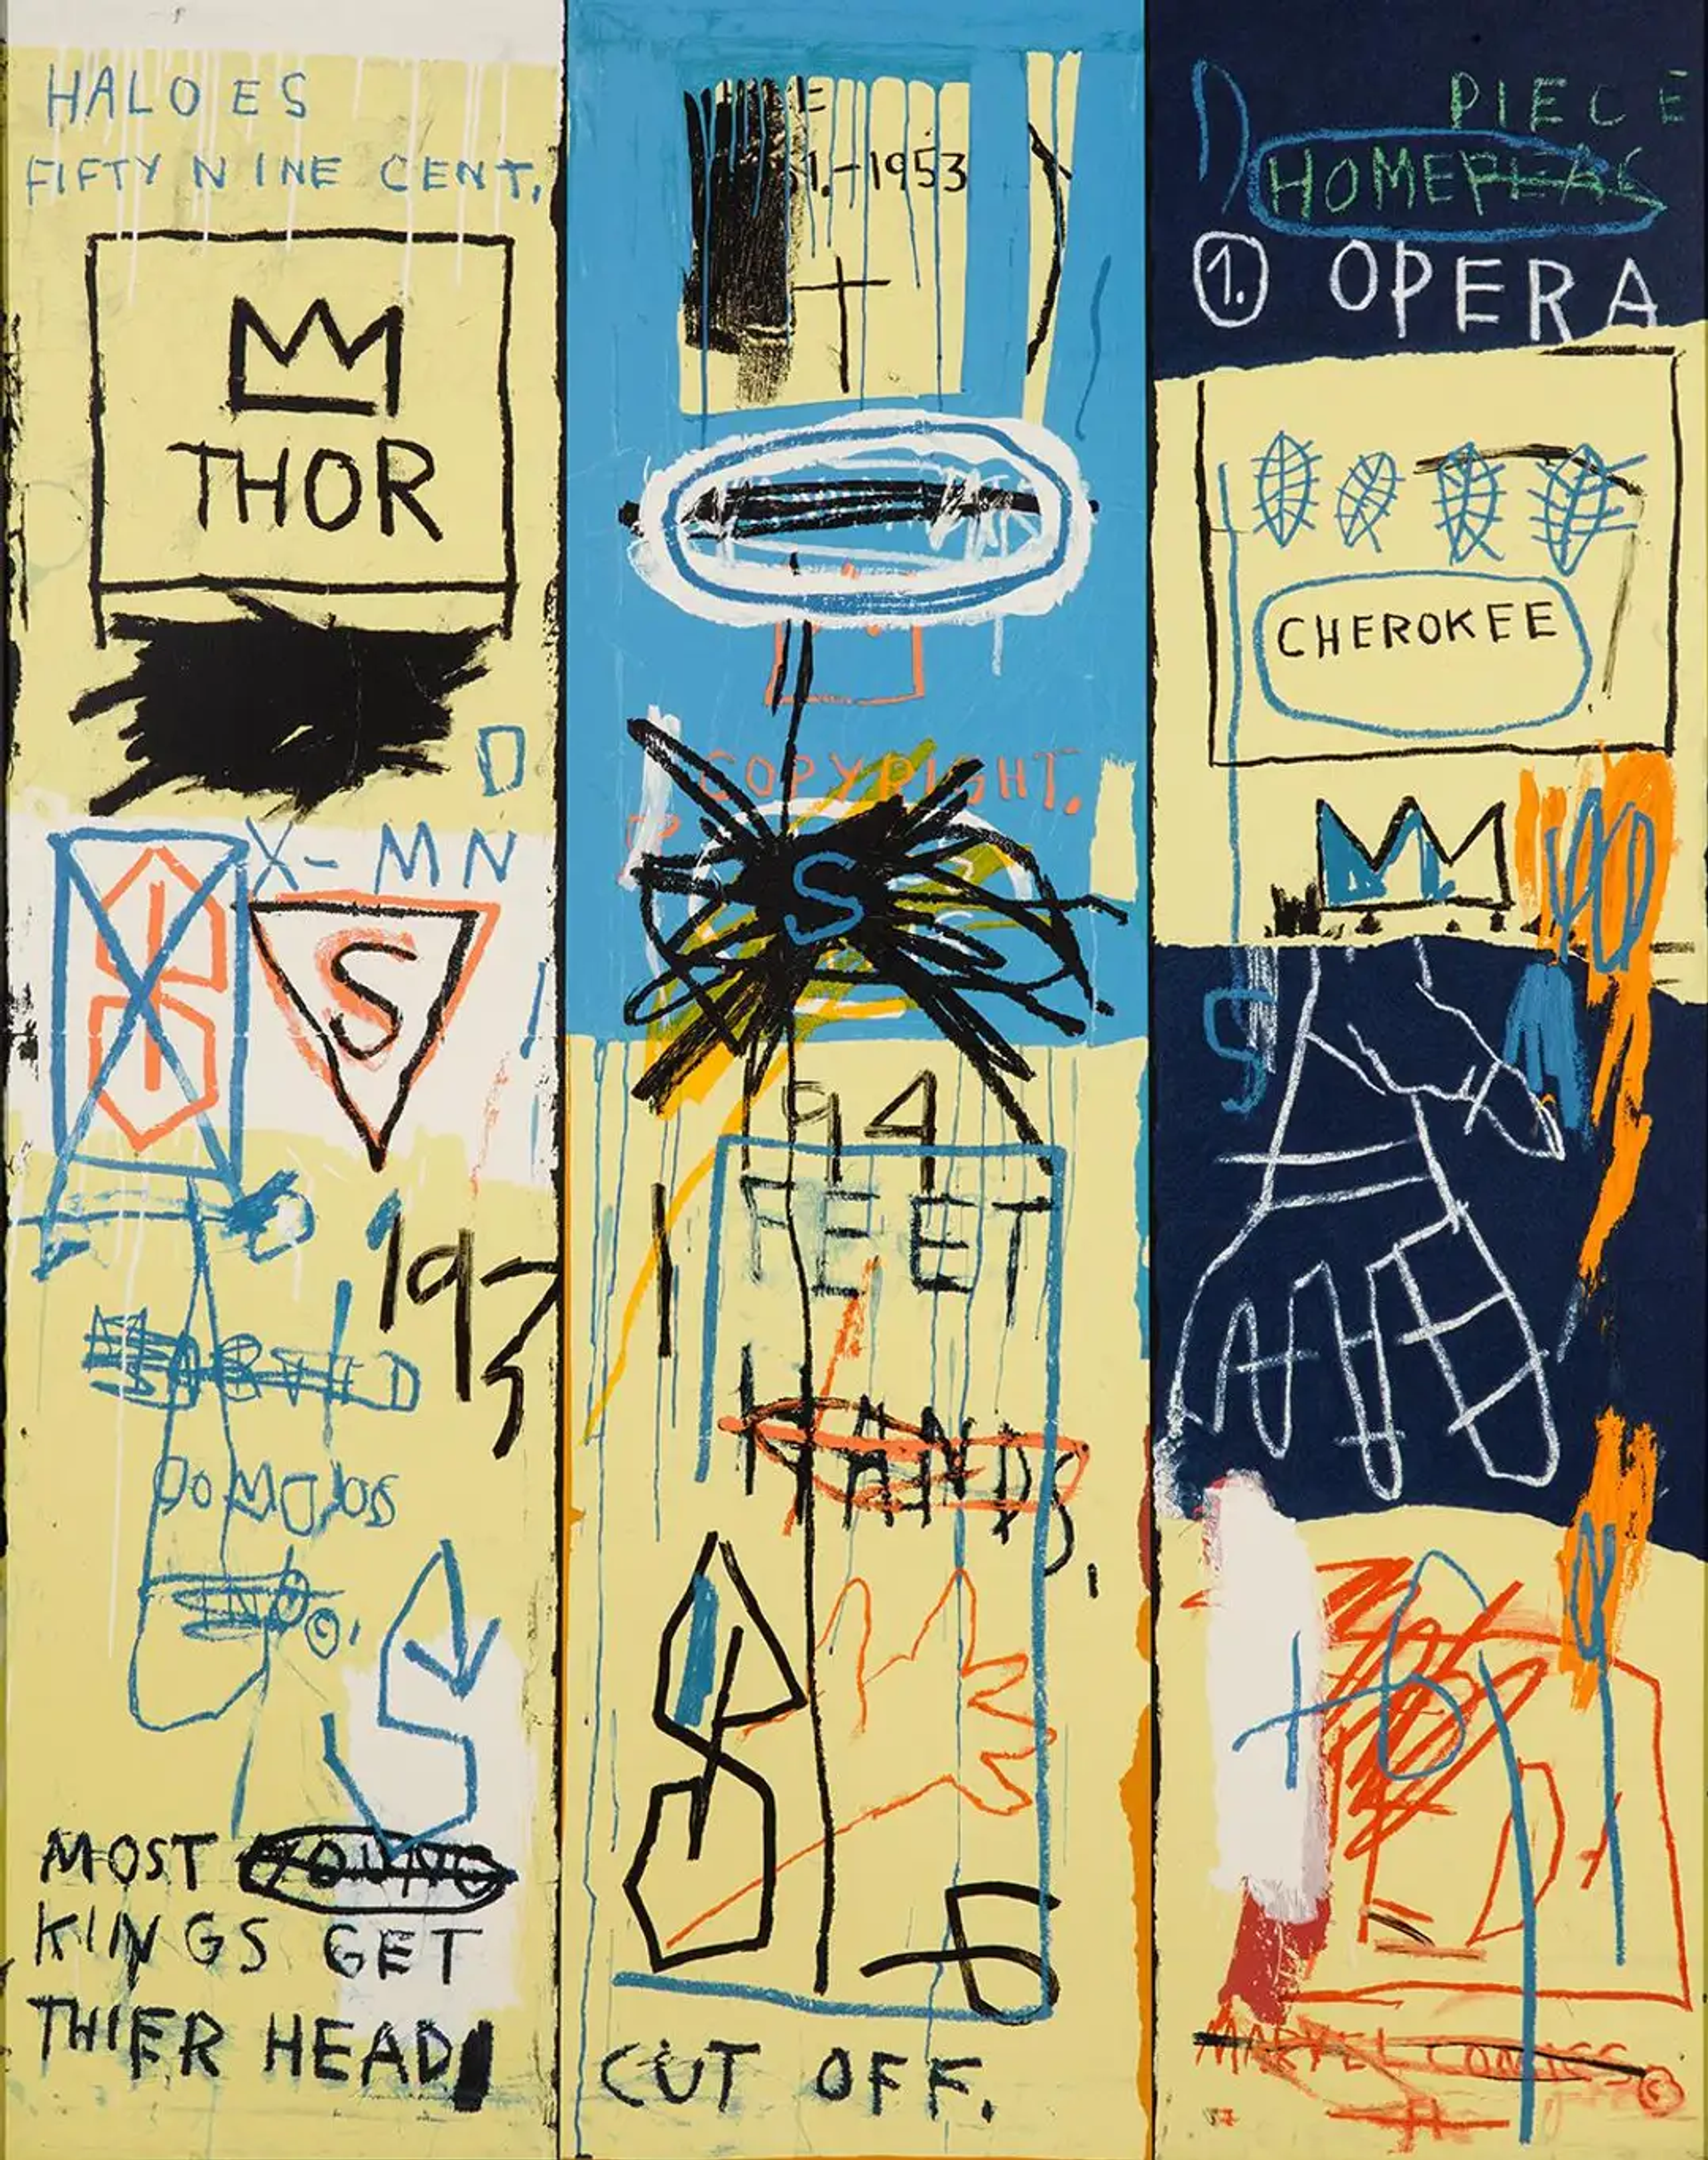 Who Owns a Jean-Michel Basquiat?